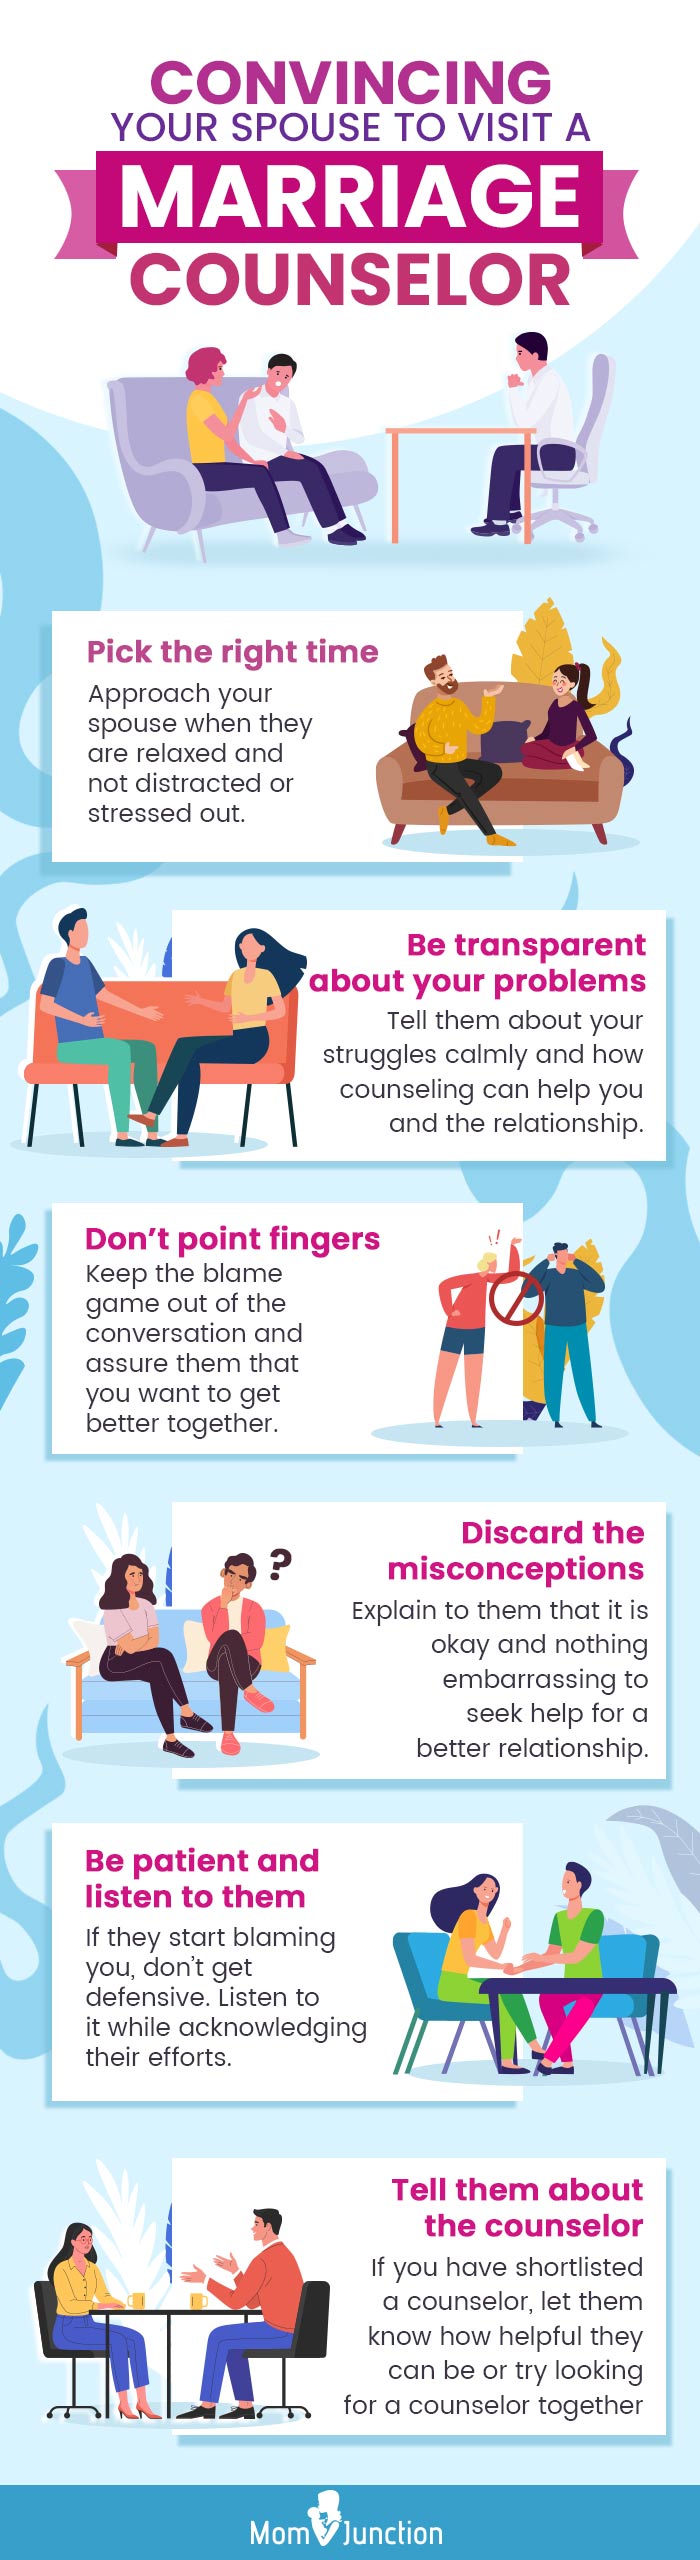 convincing your spouse to visit a marriage counselor (infographic)